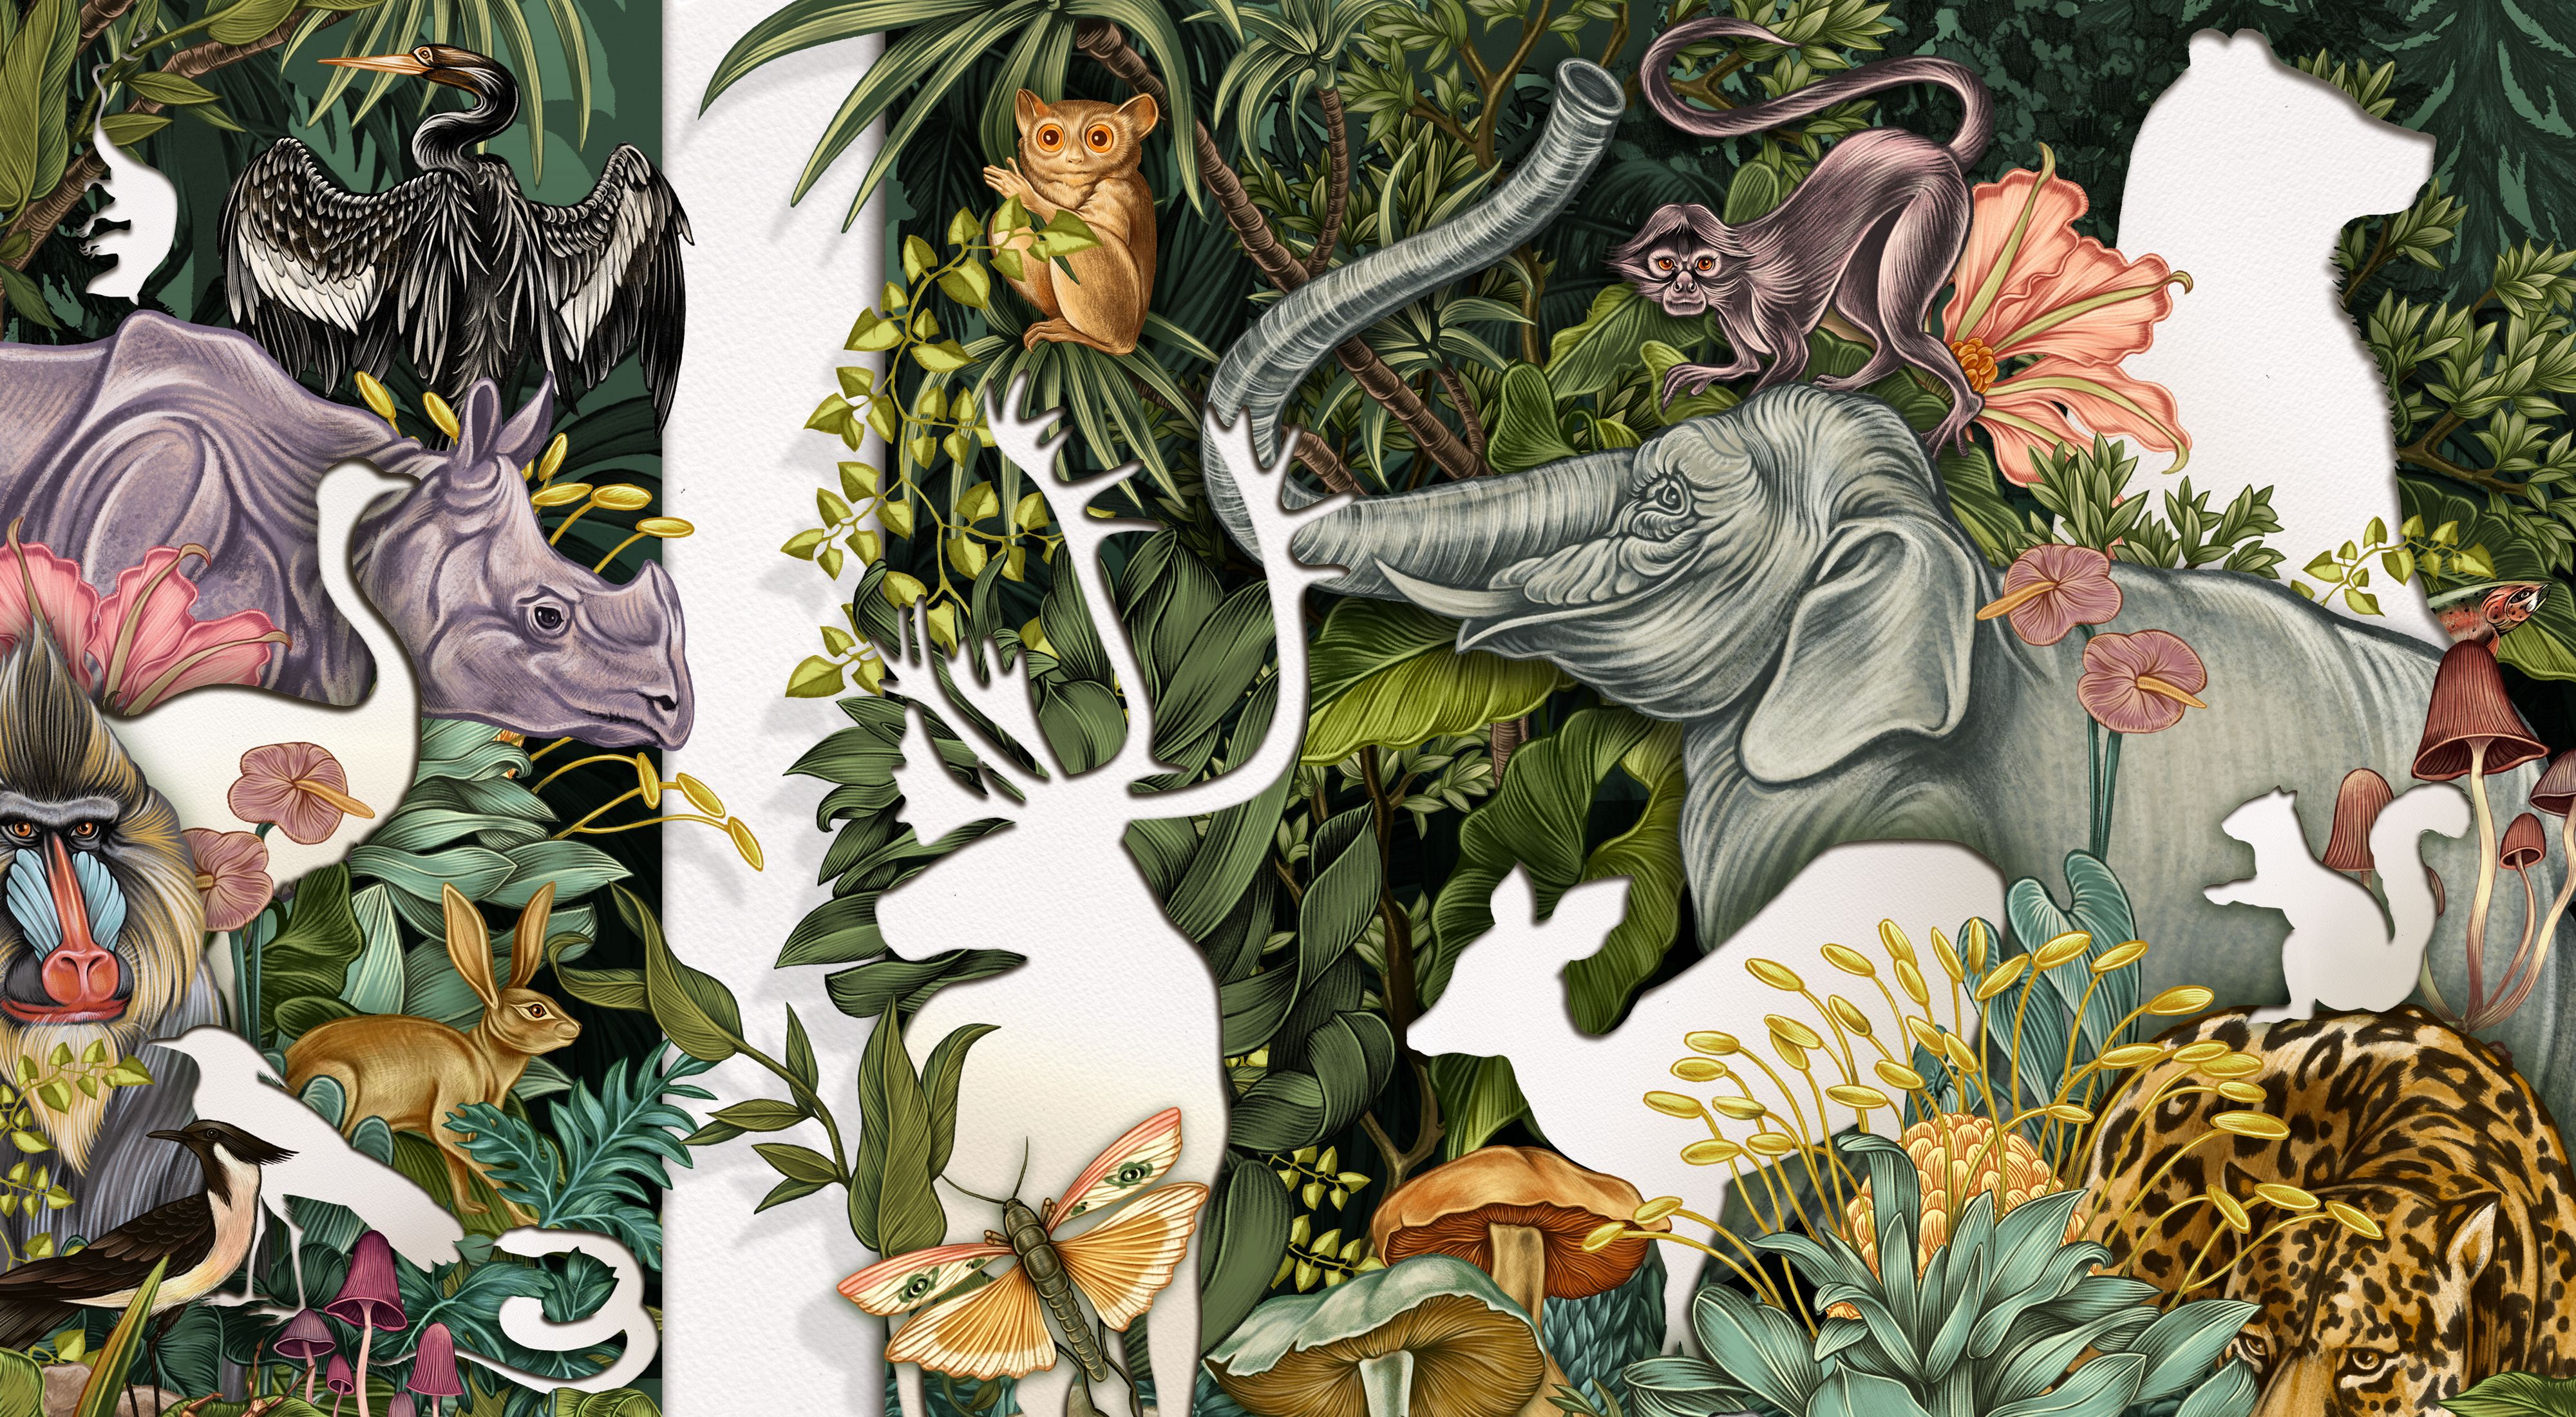 A color illustration shows many plants and animals with some missing as empty silhouettes.